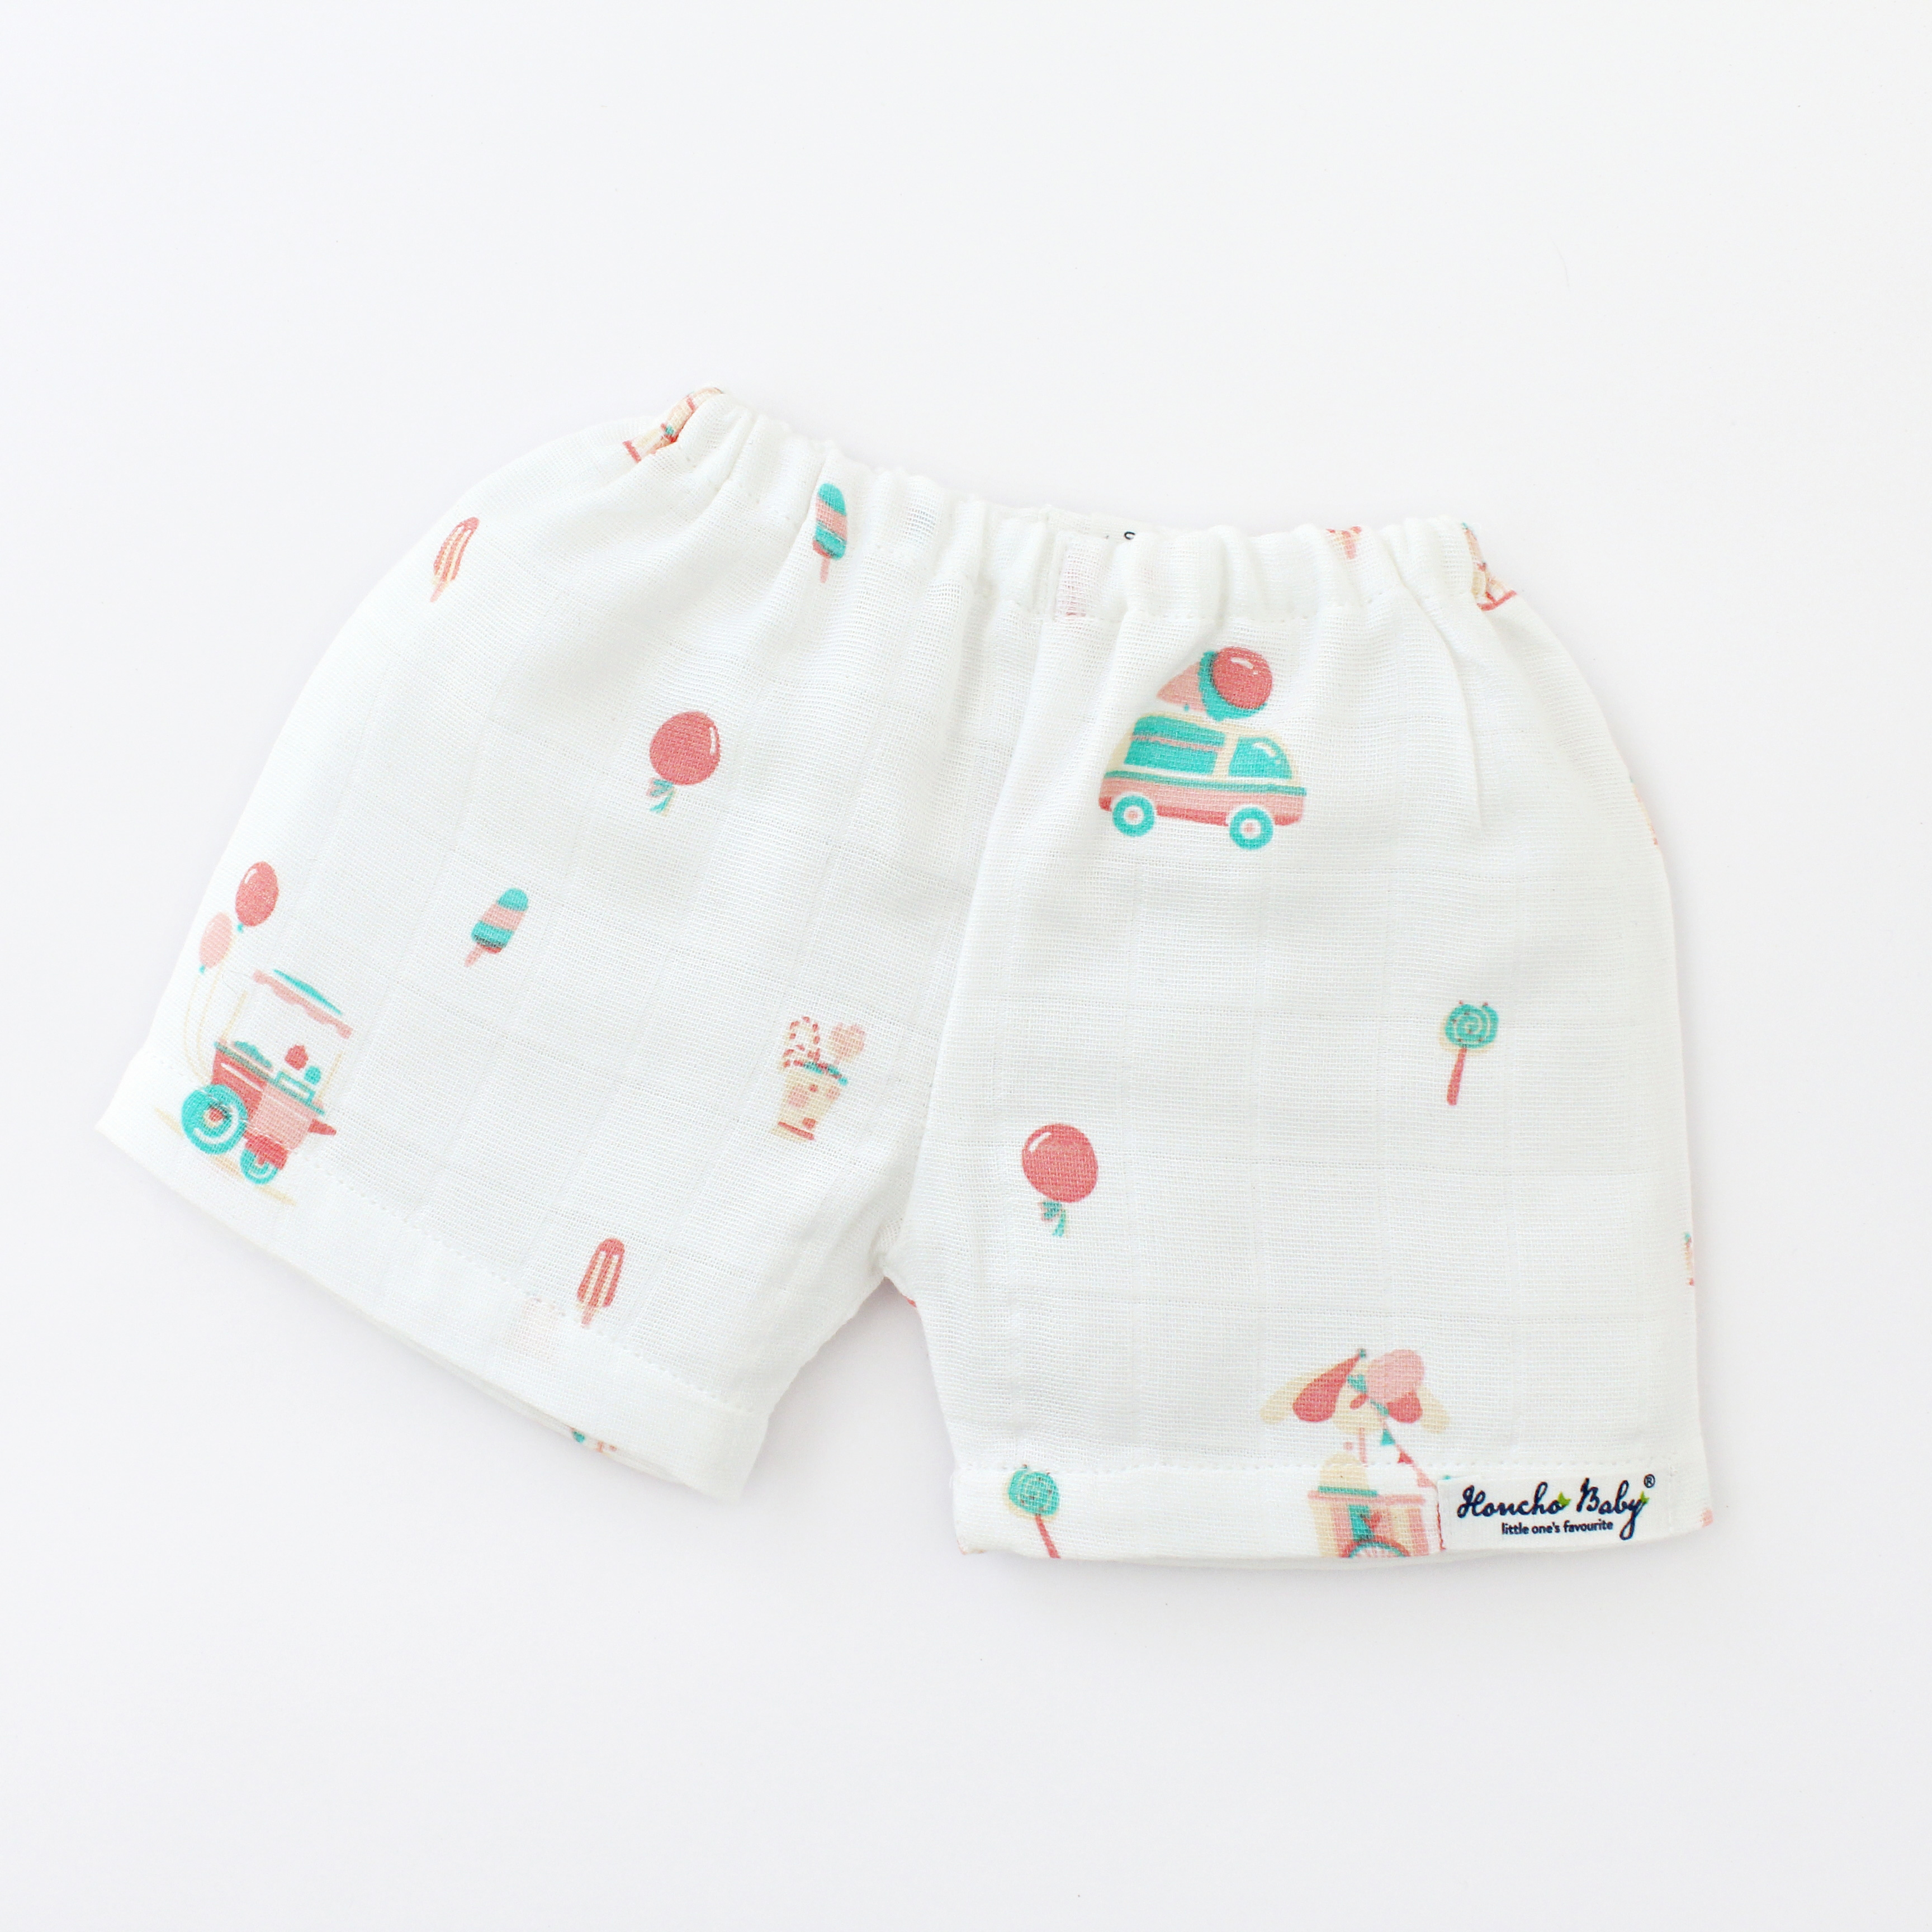 I hear the Ice Cream truck!- Unisex Shorts - 1 Pack ( 0 to 3 years )